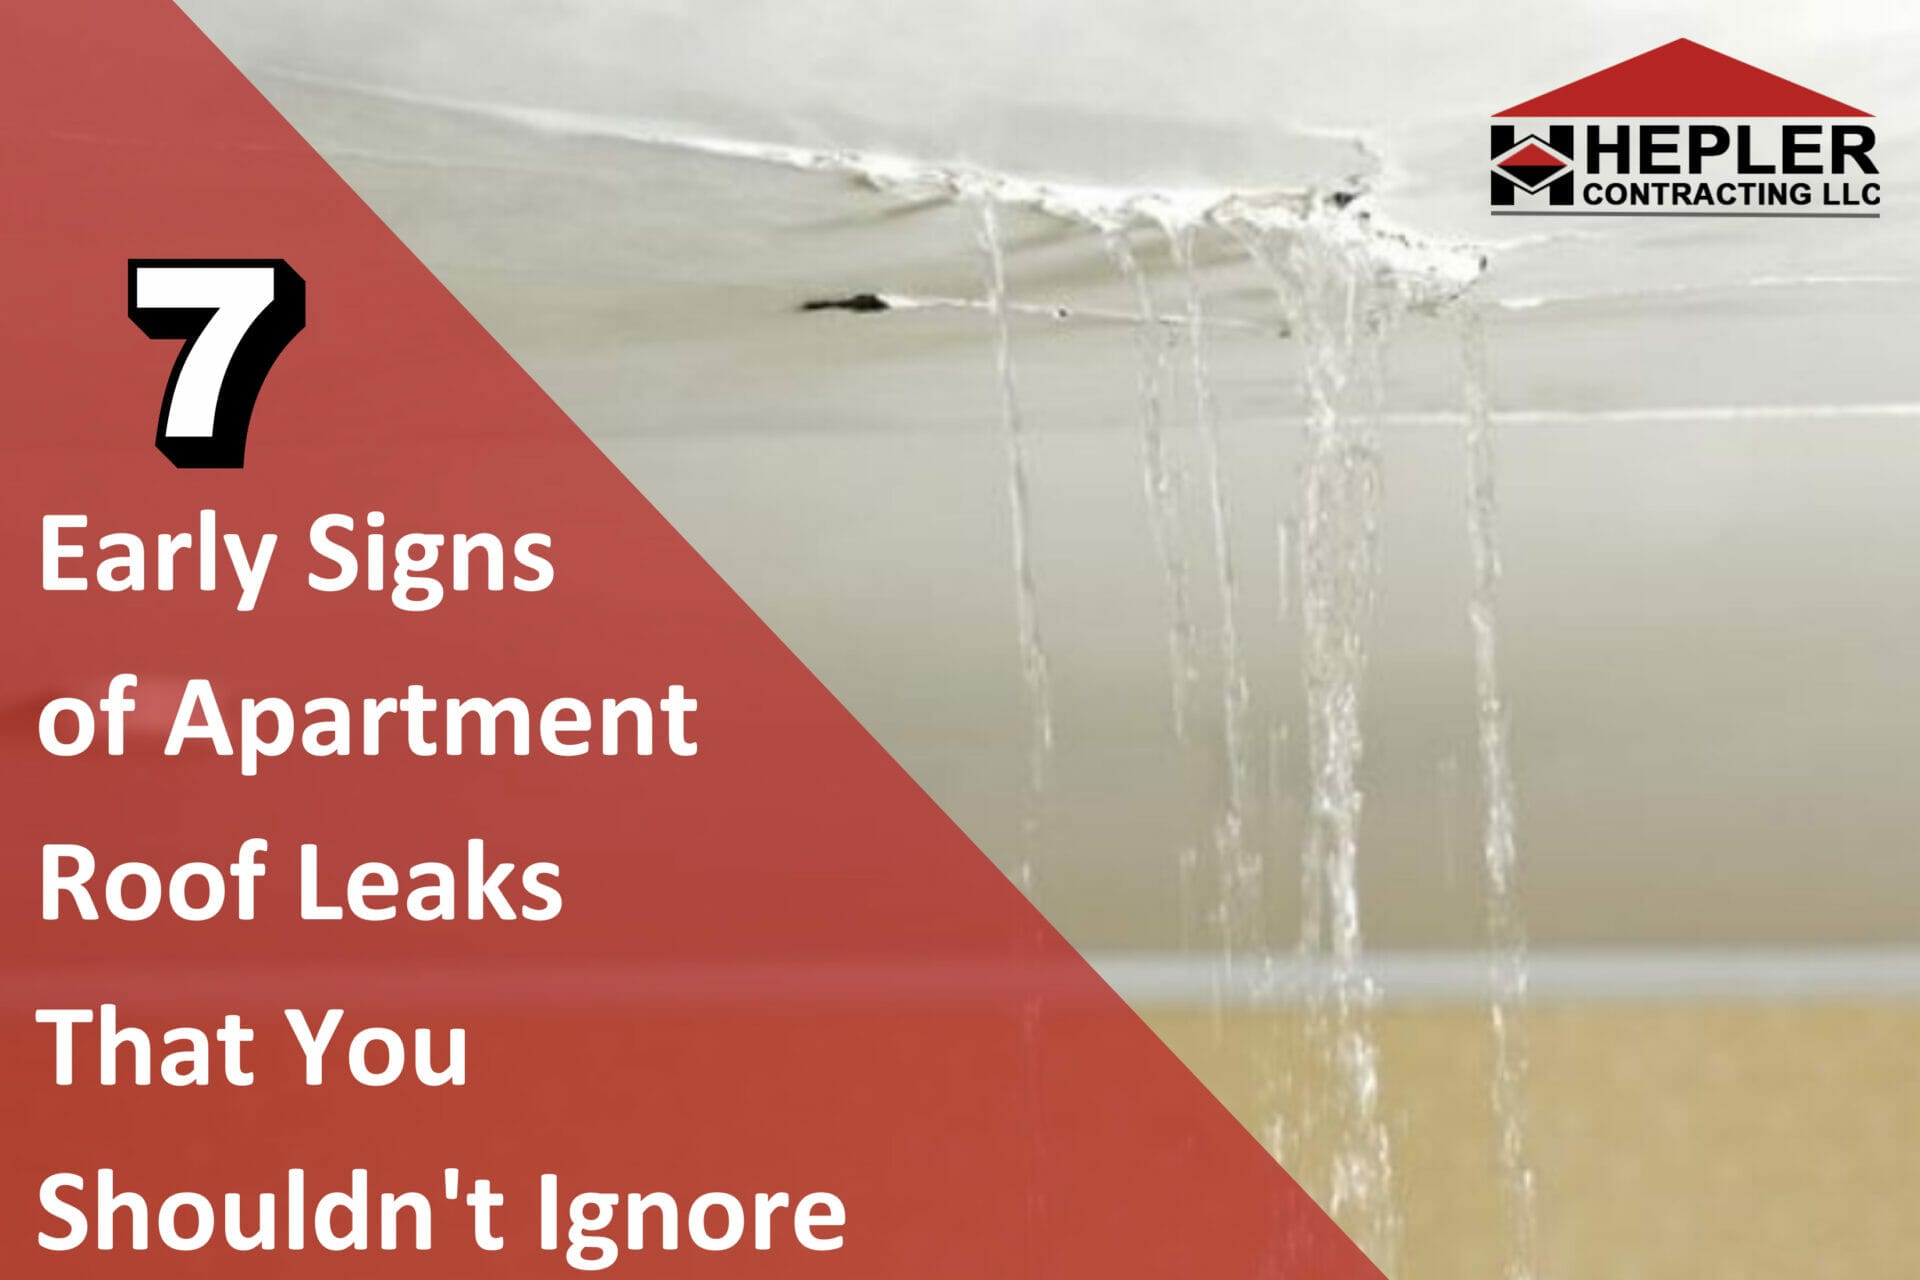 7 Early Signs of Apartment Roof Leaks That You Shouldn’t Ignore